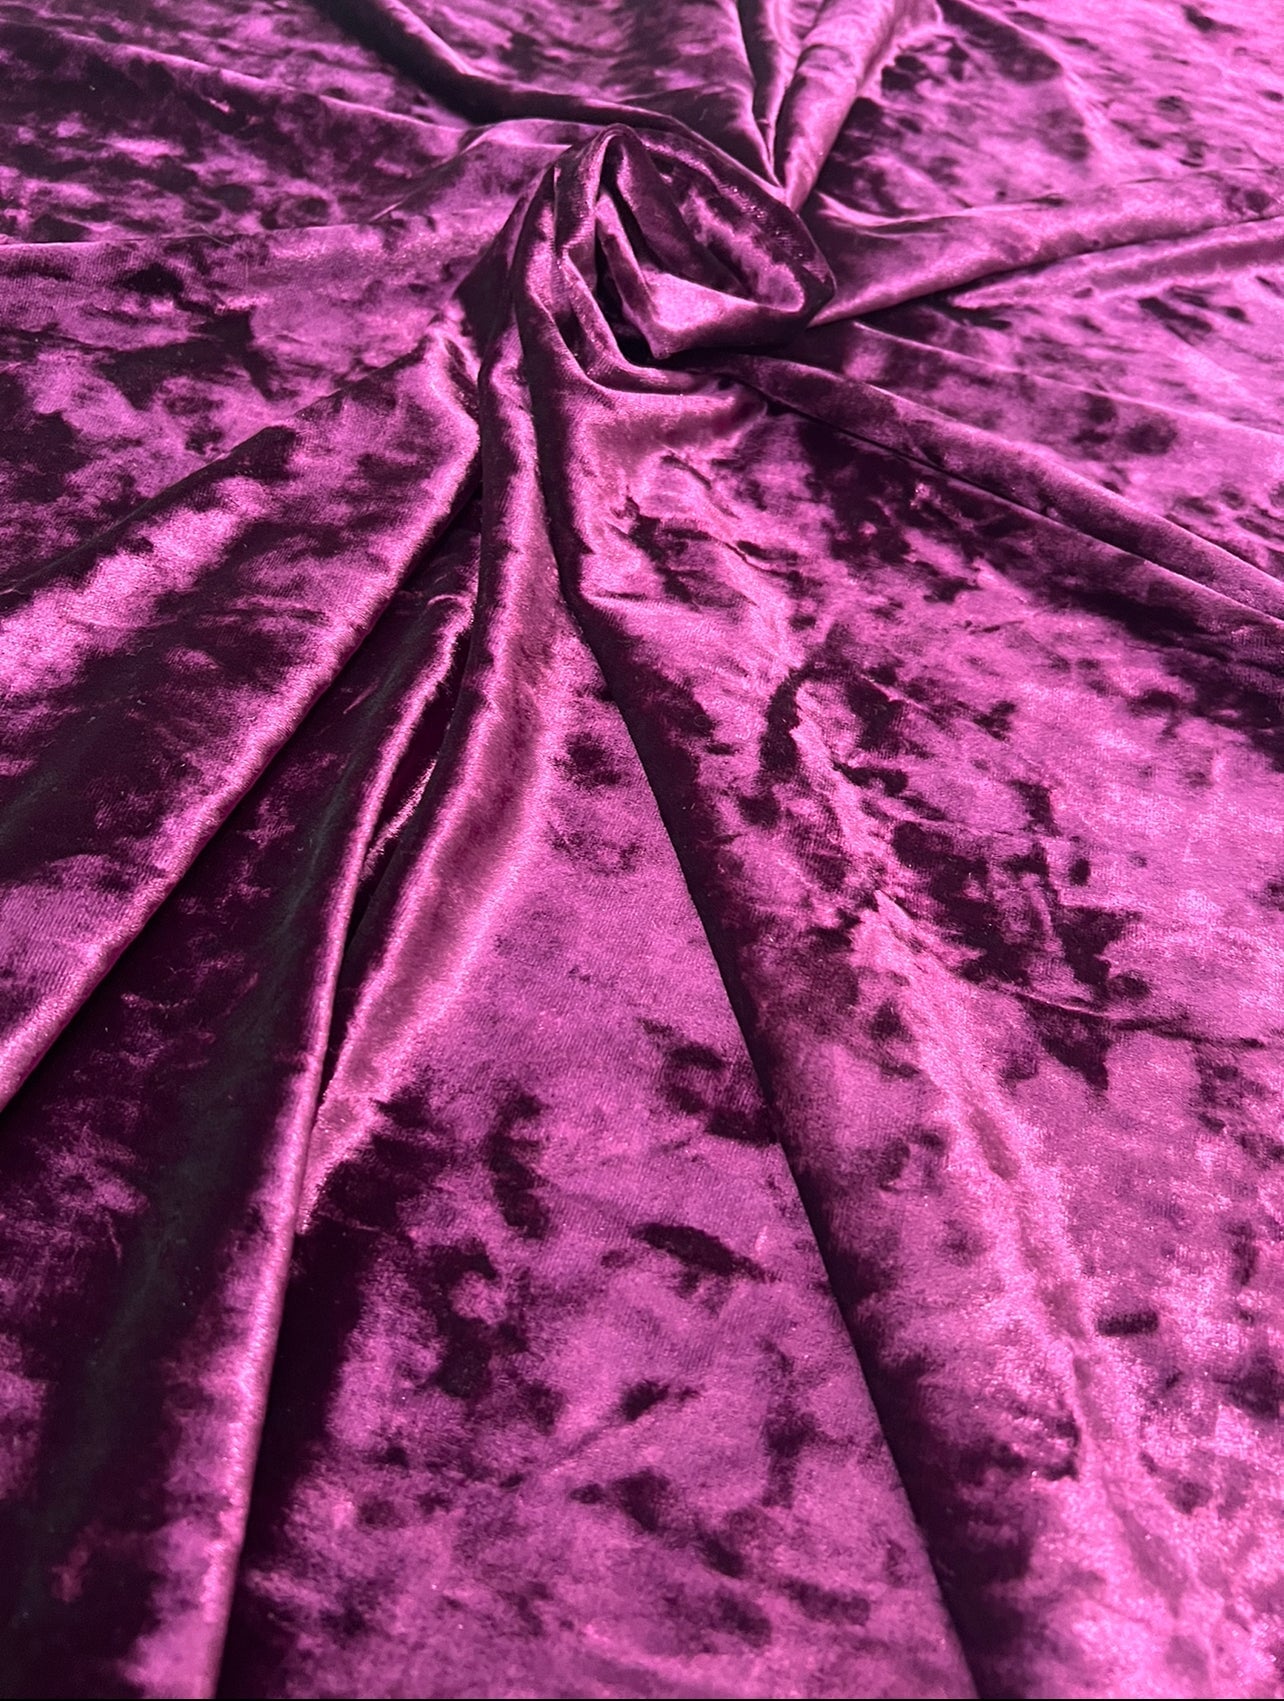 Plum Stretched Crushed Velvet, maroon Stretched Crushed Velvet, burgundy Stretched Crushed Velvet, Crushed Velvet, stretched velvet, velvet for woman, velvet for bride, velvet for party wear dresses, velvet on discount, velvet on sale, buy velvet online